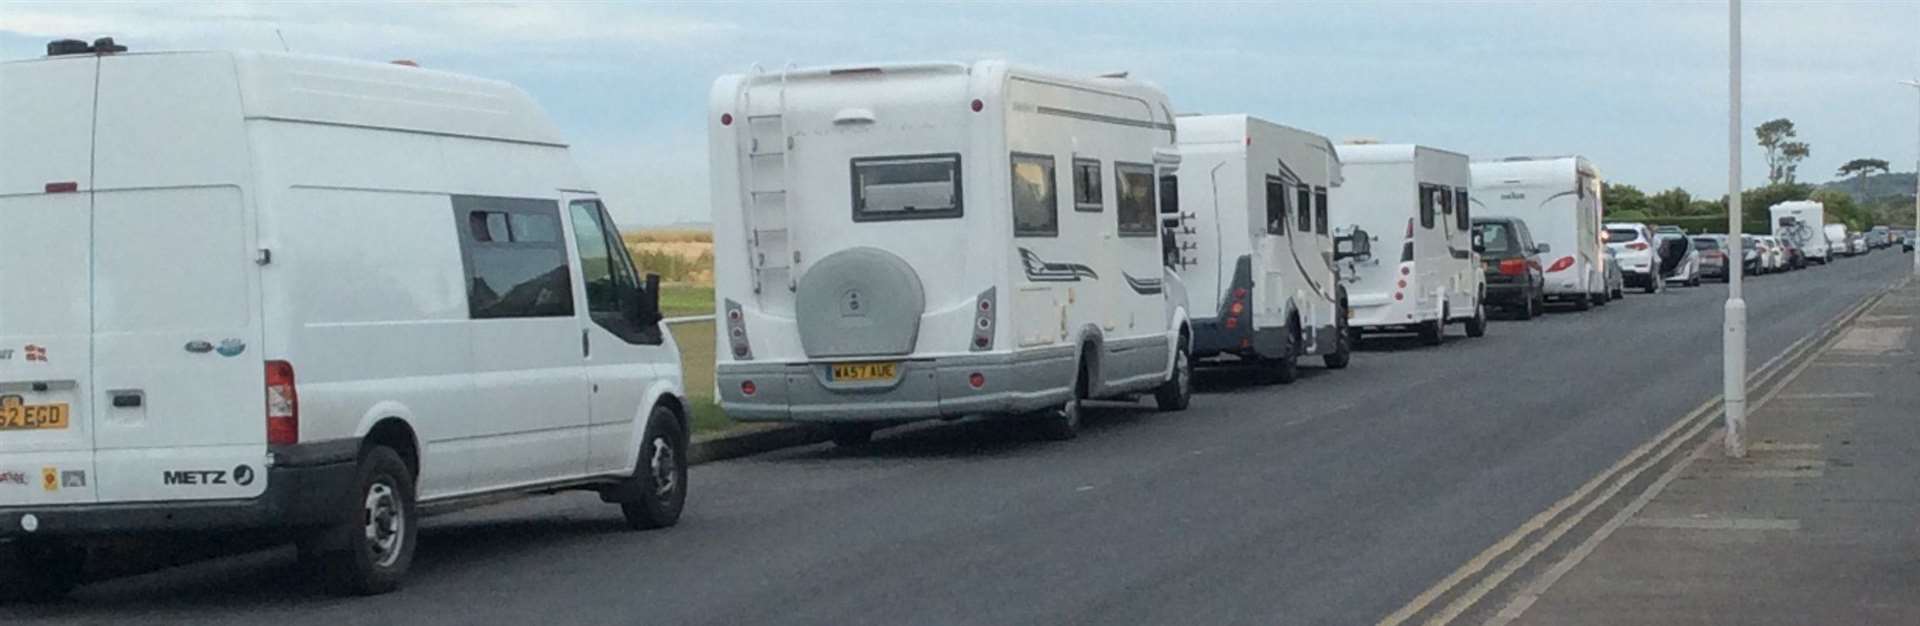 New restrictions could mean motorhomes will no longer be able to park along The Beach in Walmer overnight Picture: Pip Bailey